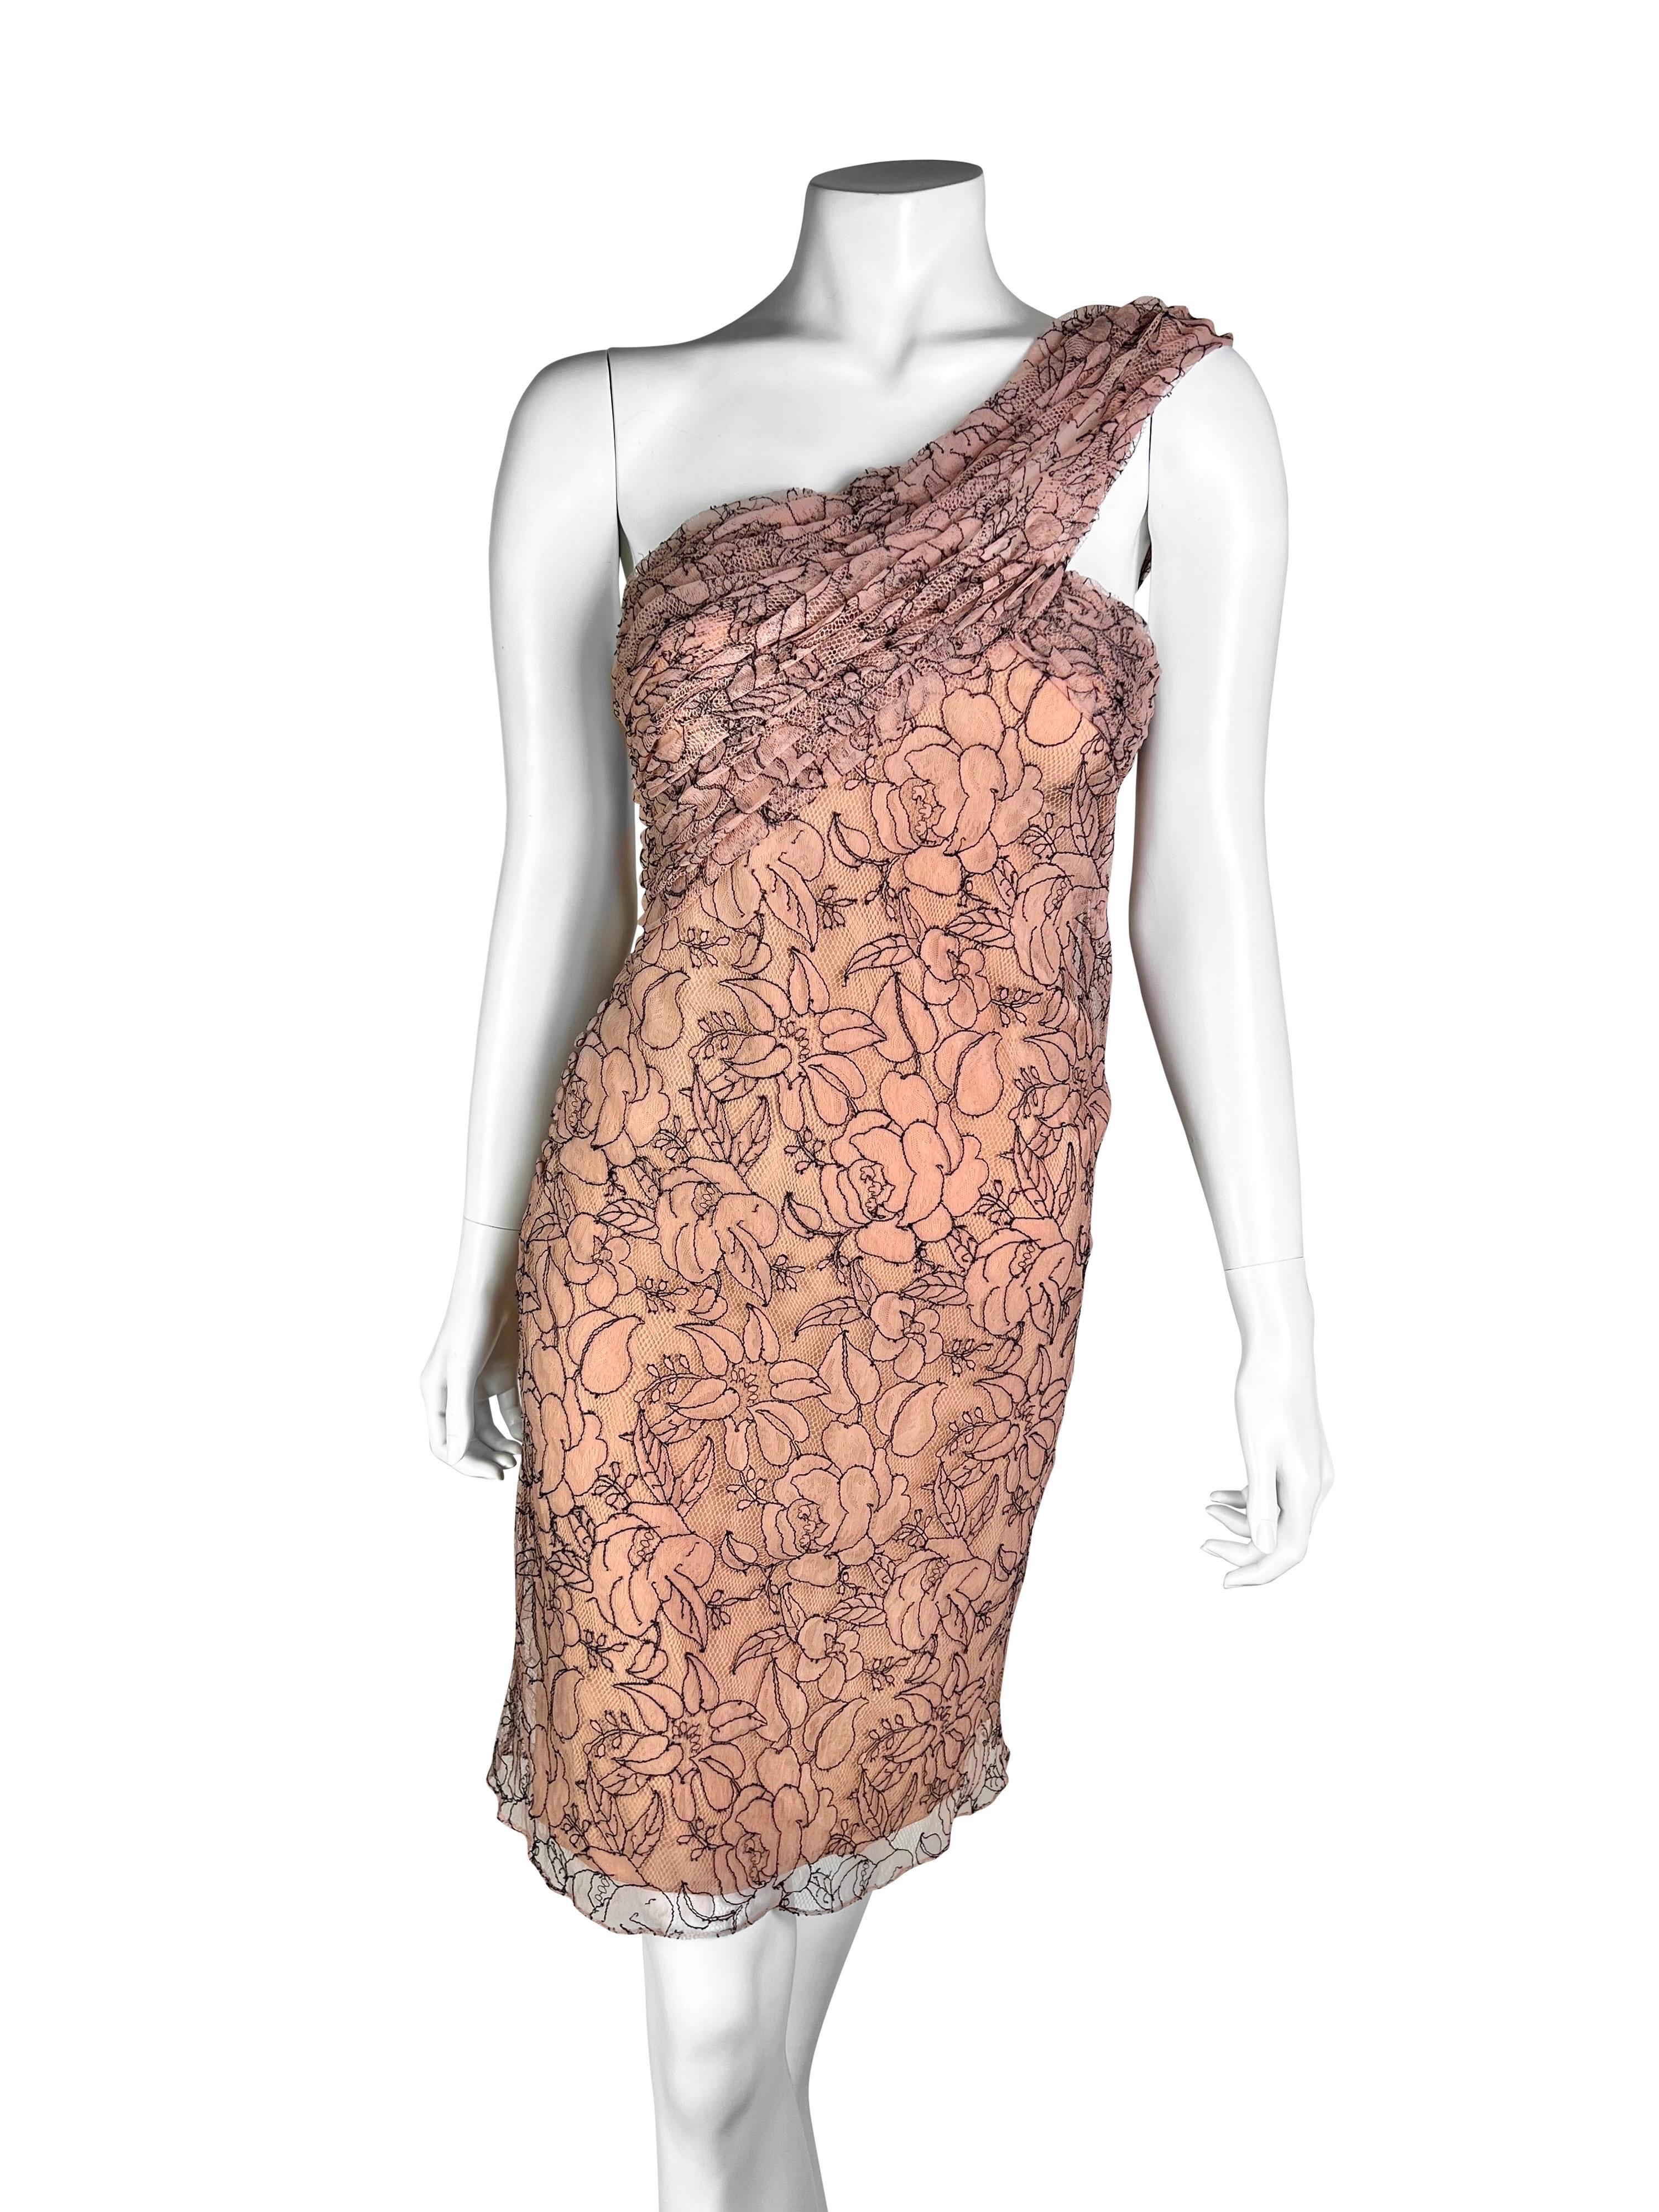 A stunning silk dress with a gorgeous layer of intricate lace, signature for the collection neutral color, very flattering on various complexions. 

Size FR 38.

Measurements (flat lay on one side):
- Armpit to armpit - 41 cm (16 in)
- Waist - 37 cm